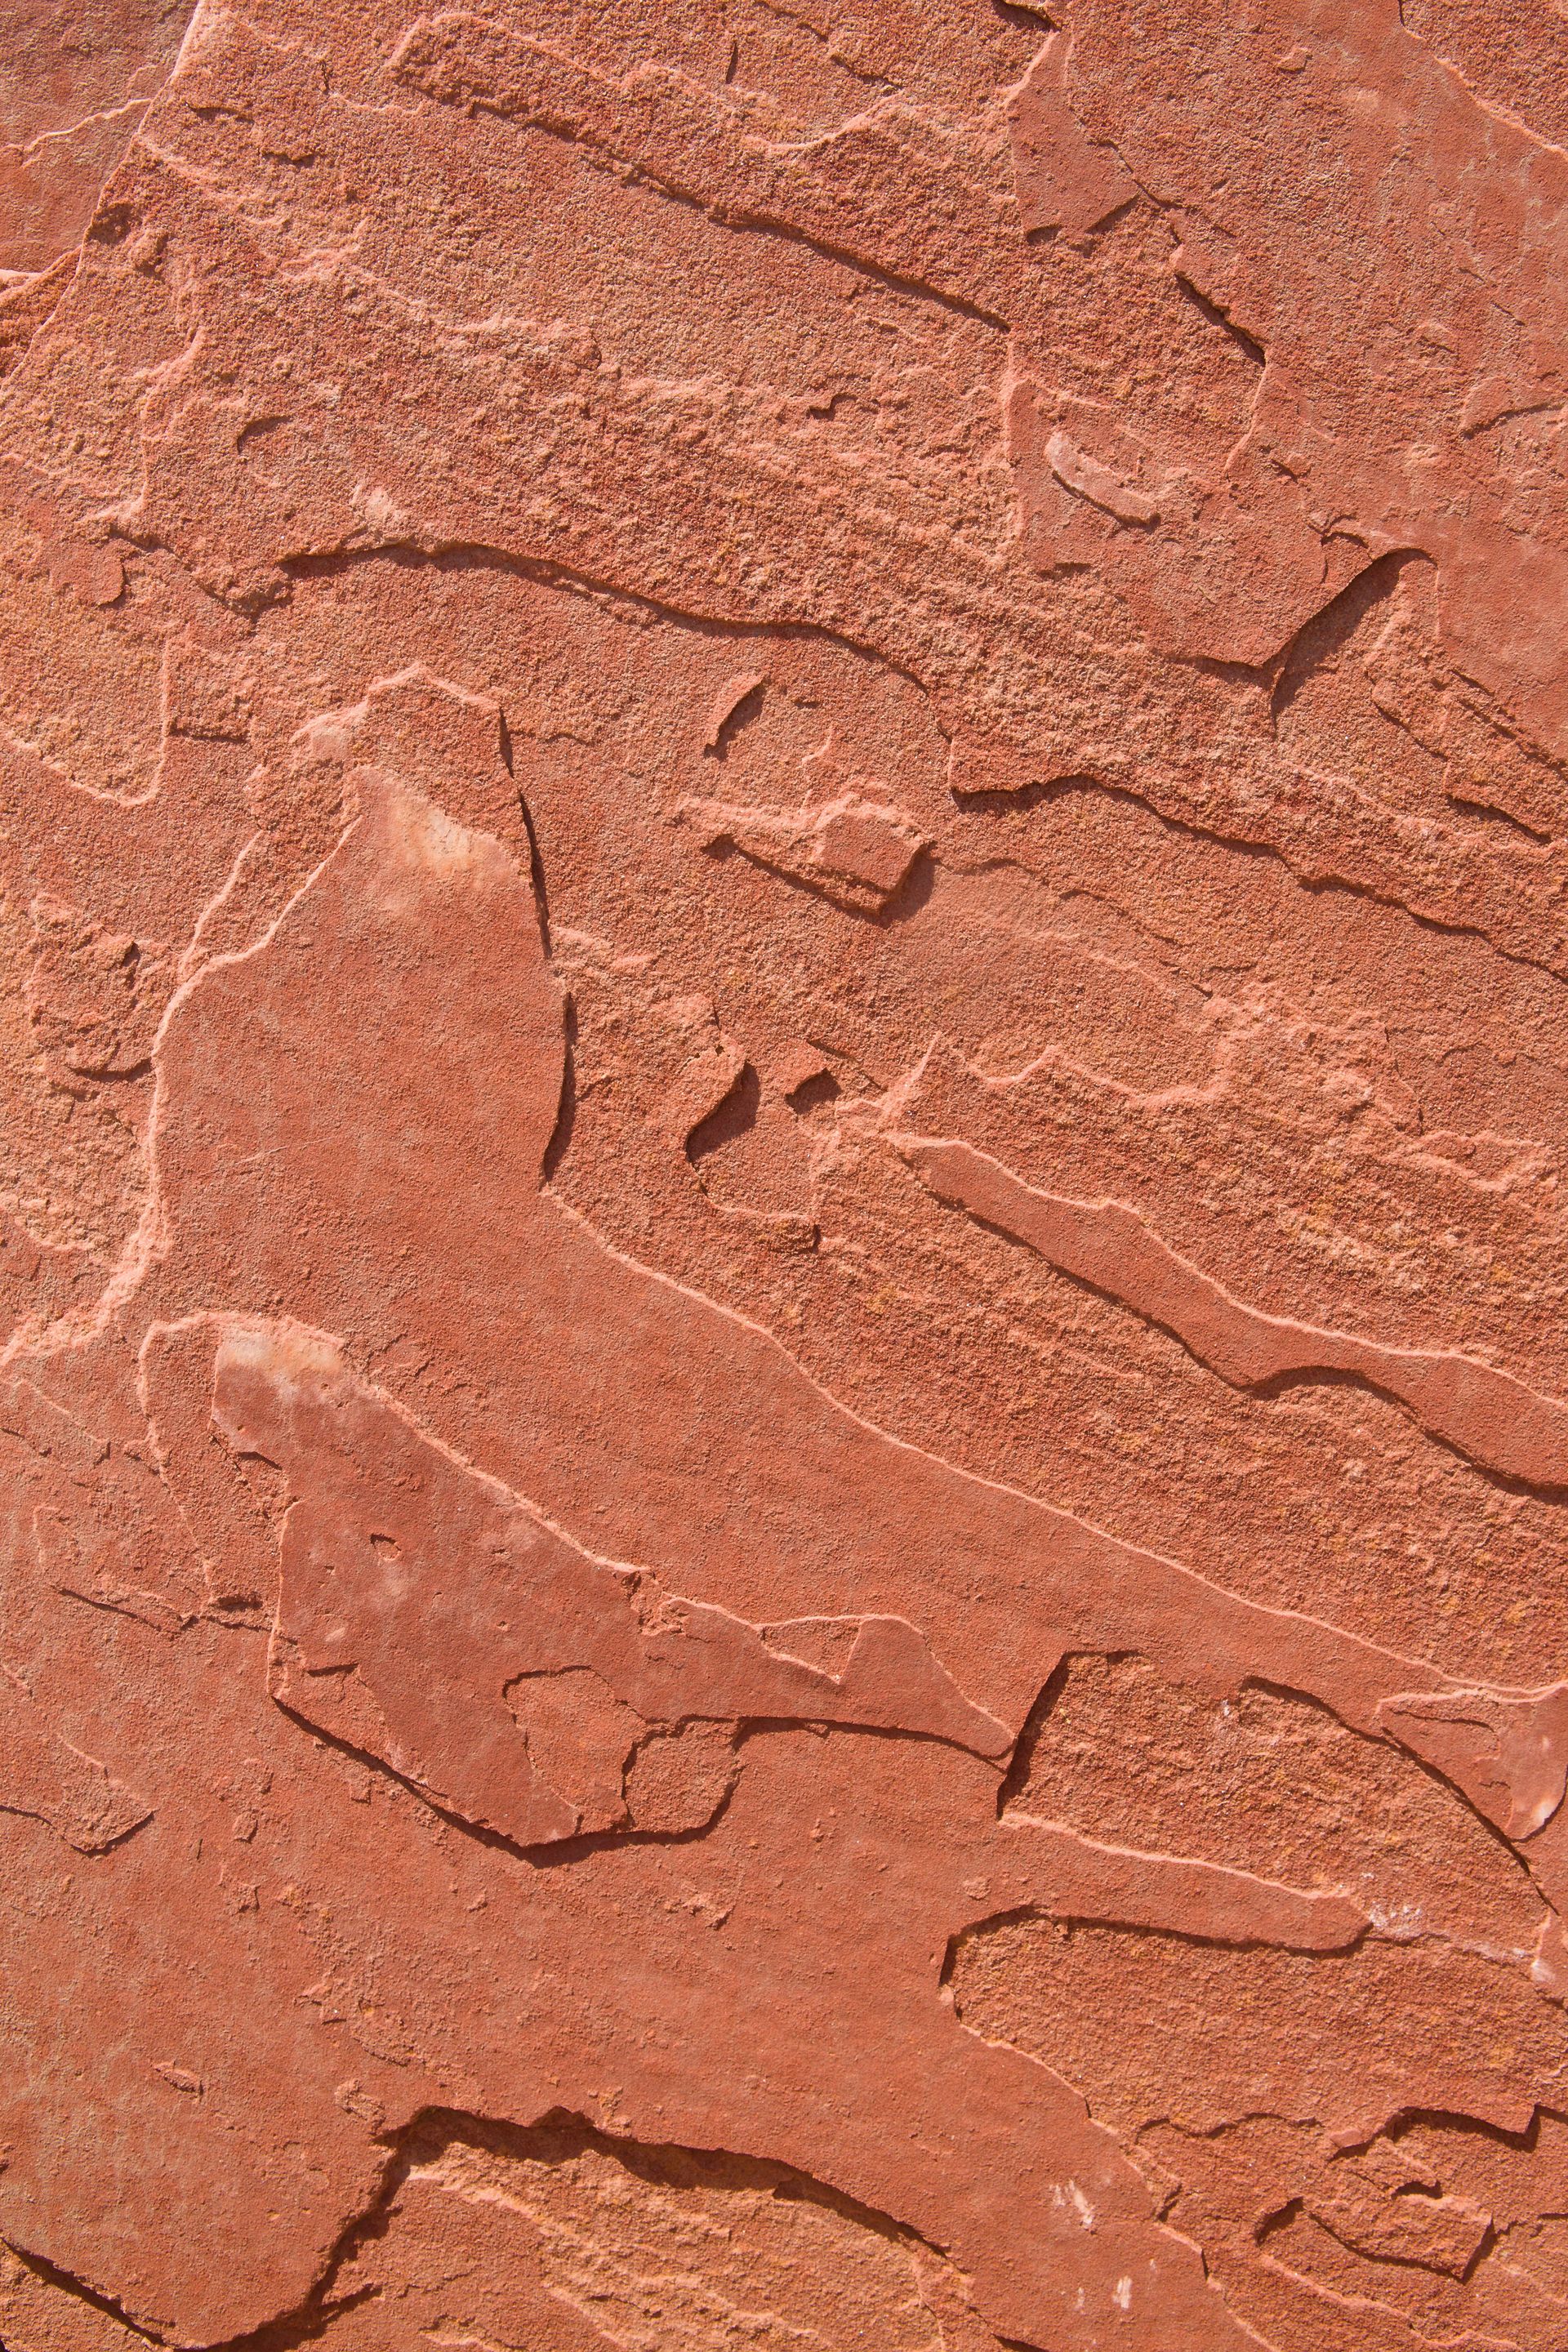 The detail on a slab of red sandstone.